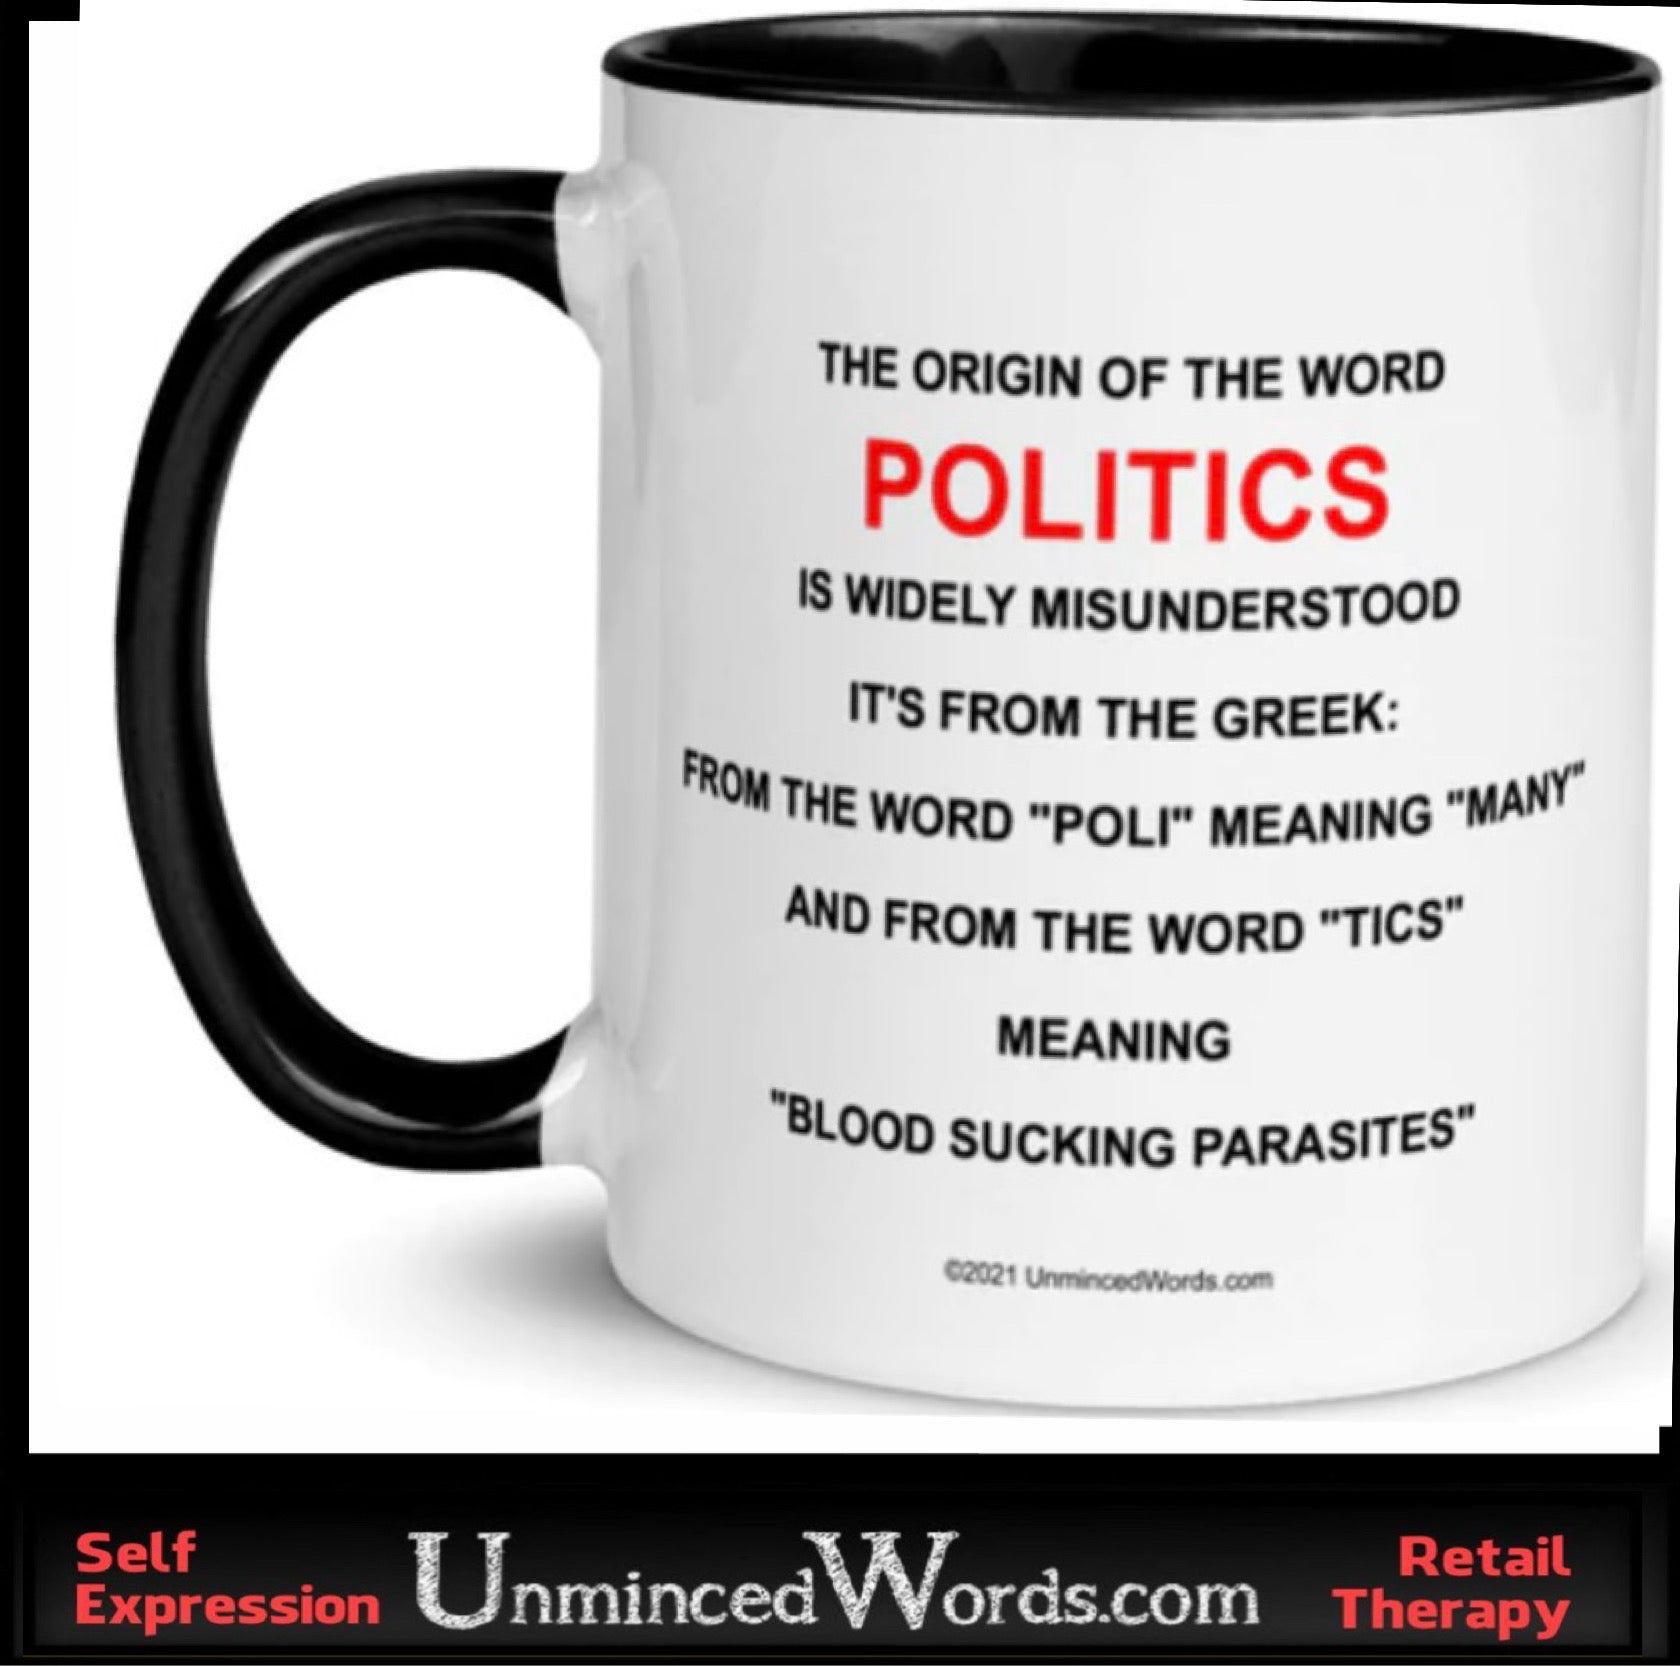 The perfect gift for those into politics